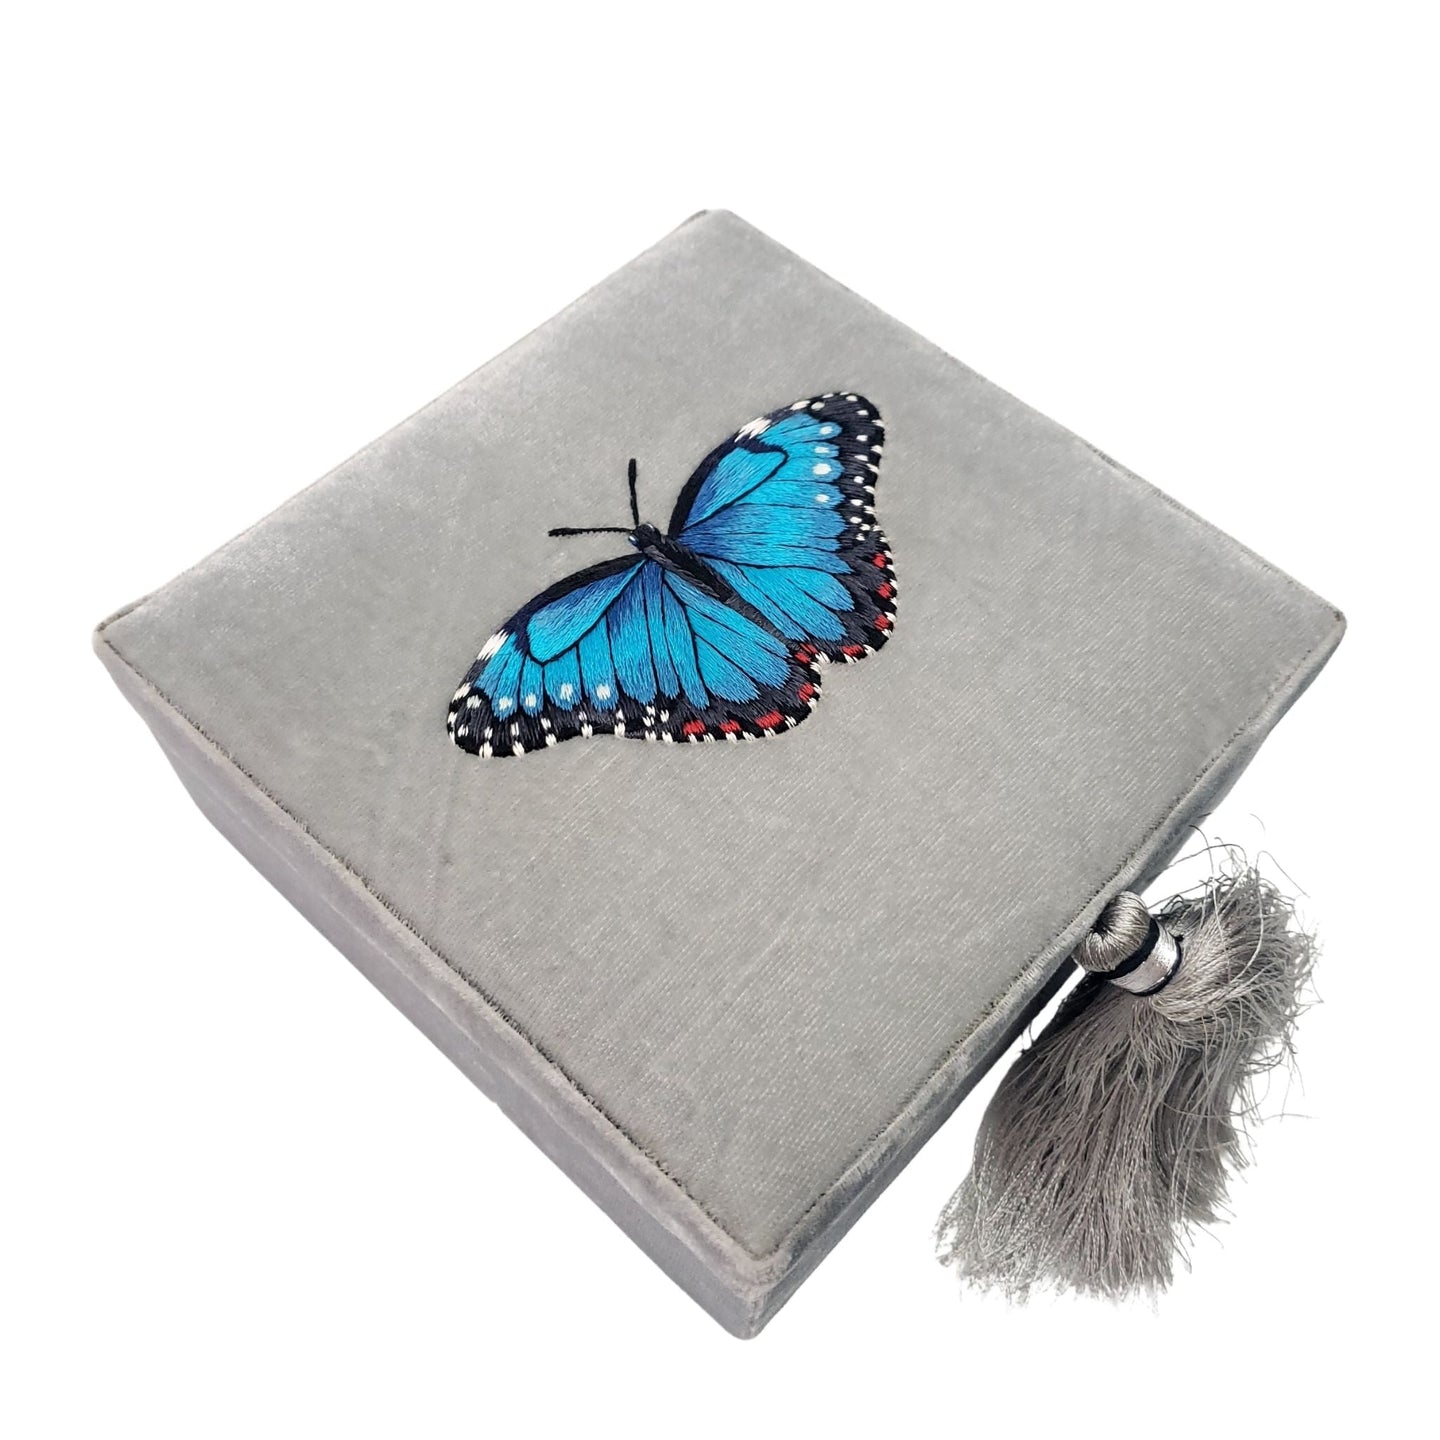 Gray velvet square gift box embroidered with blue morpho butterfly BoutiqueByMariam. 